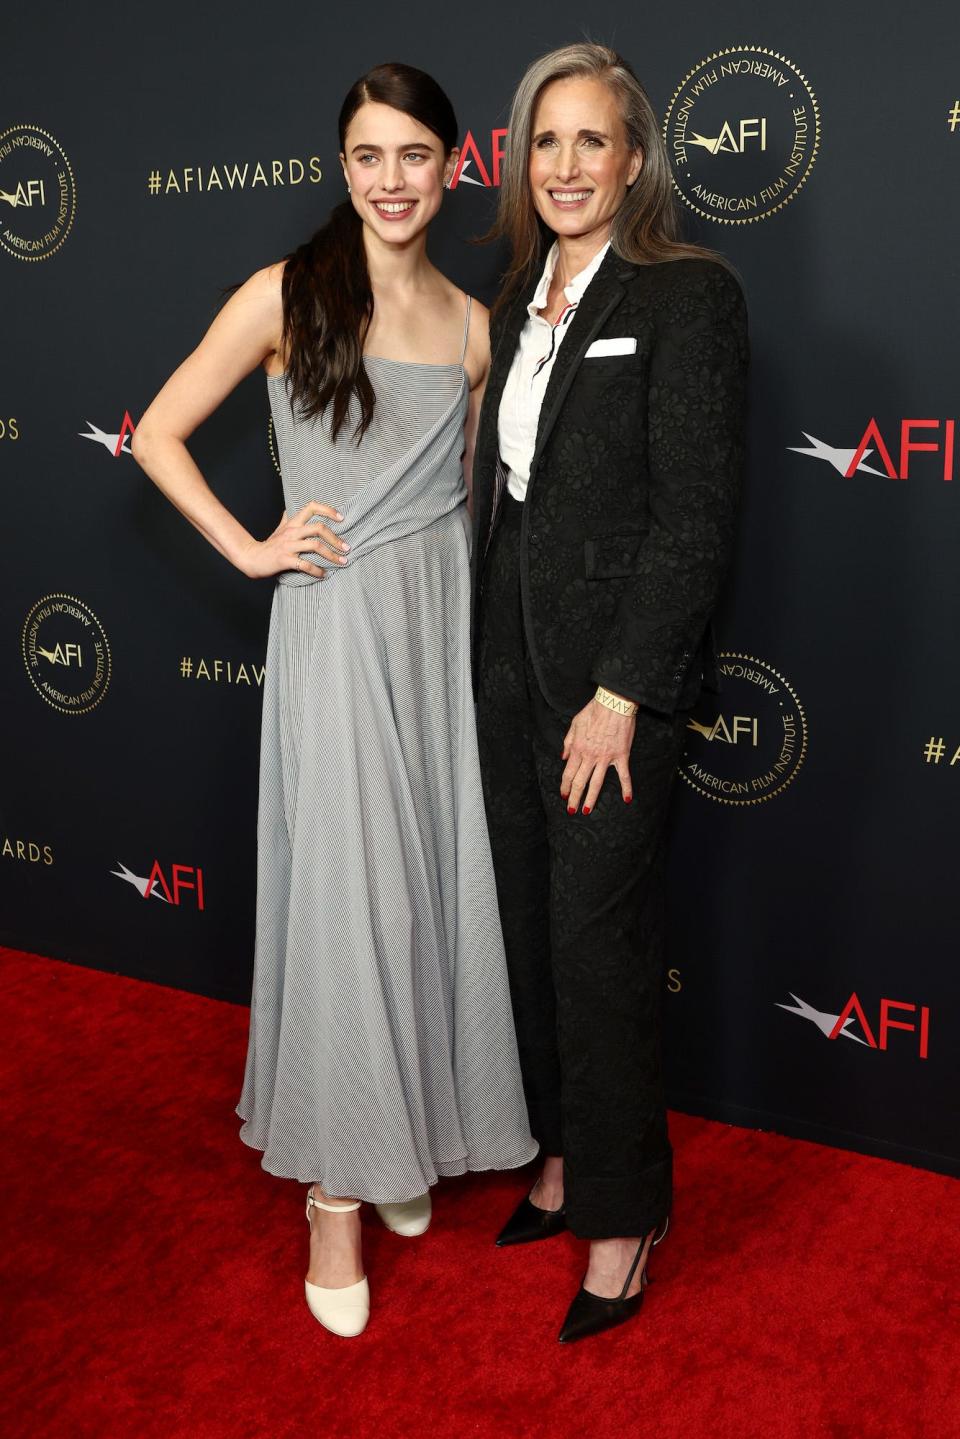 Margaret Qualley and Andie MacDowell at the AFI Awards lunch on March 11, 2022.